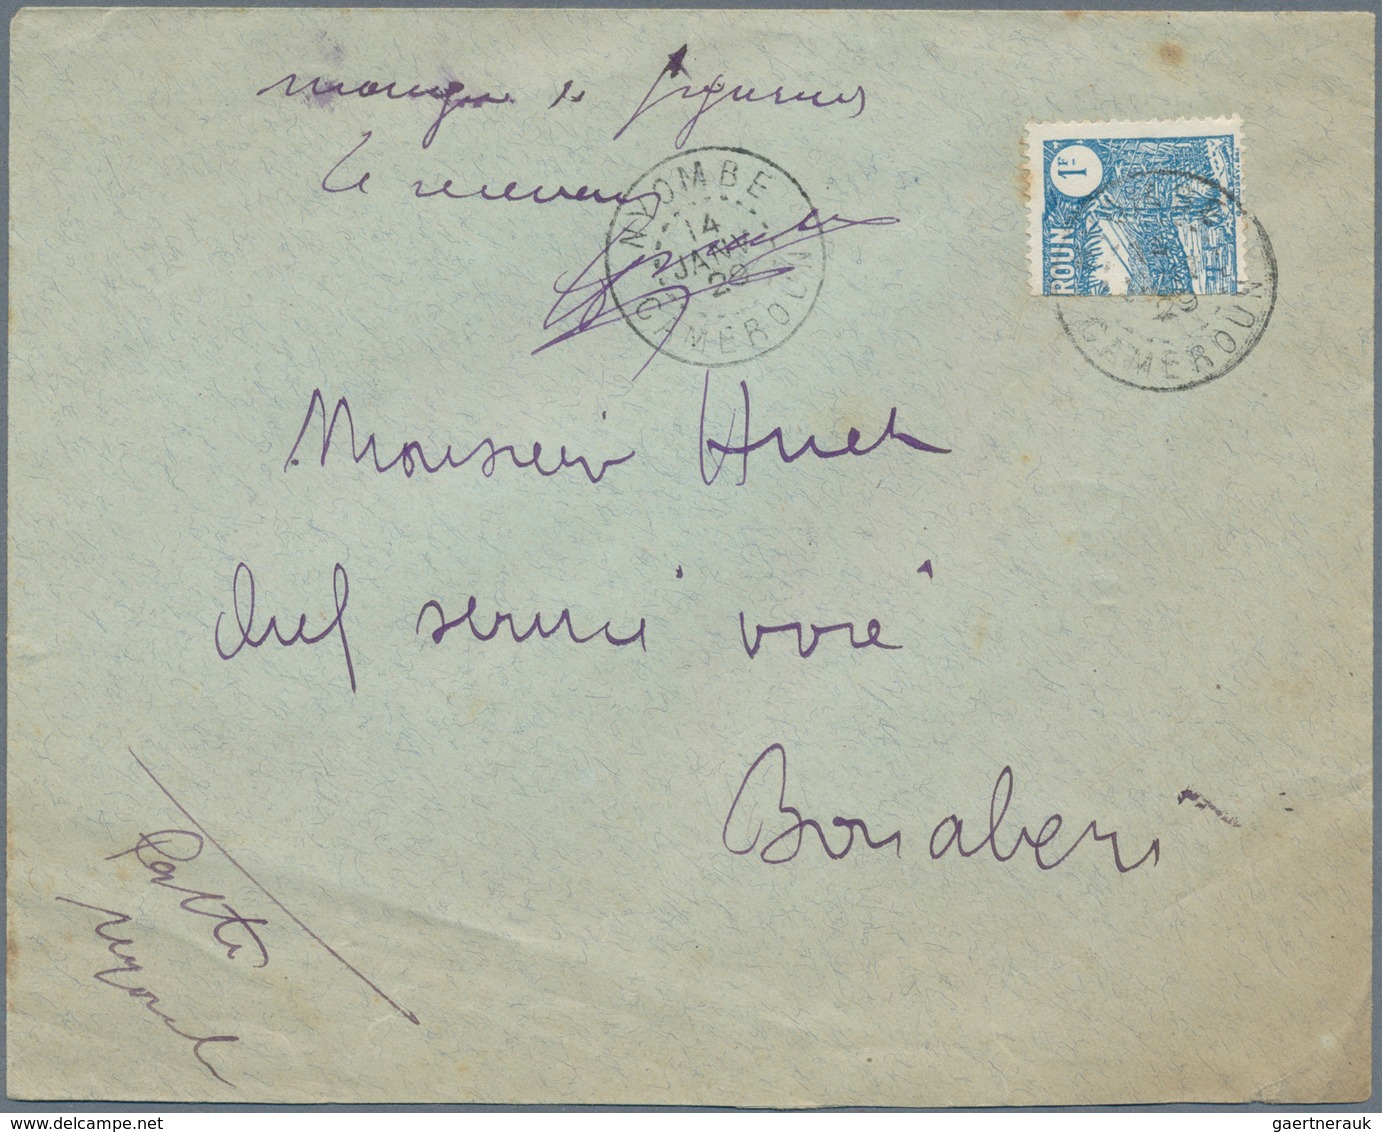 Kamerun: 1929 BISECTED 1 FRANC Cancelled By "NYOMBÉ 14. JANV. 29" Cds On Cover To Bonaberi. Manuscri - Cameroon (1960-...)